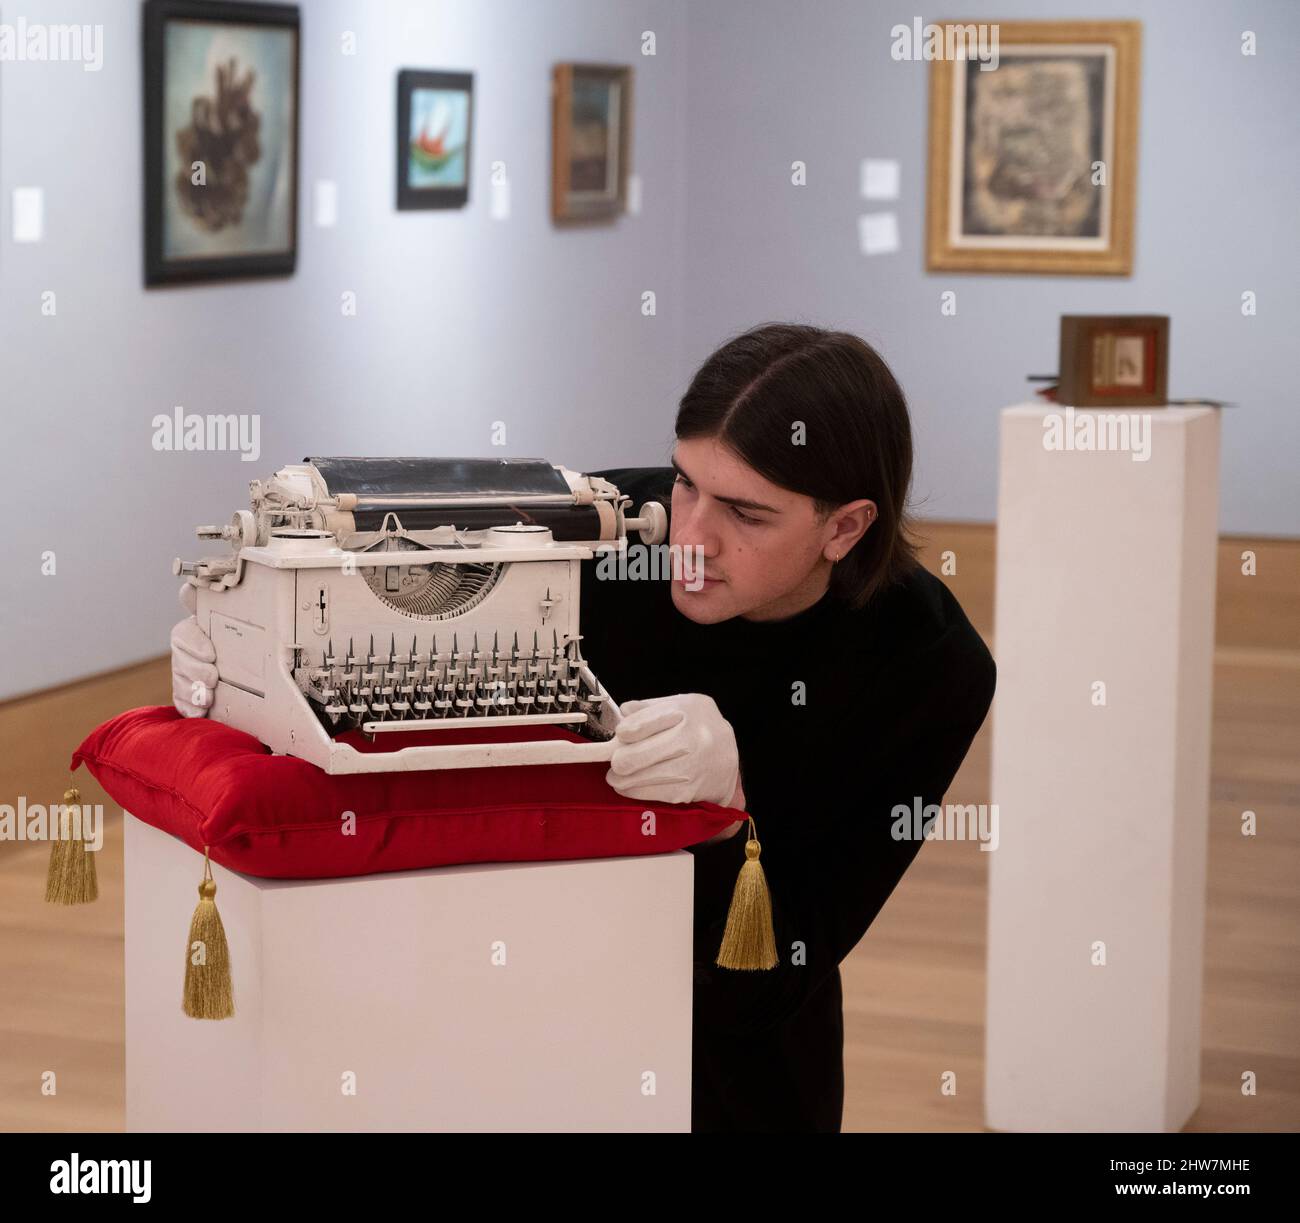 Bonhams, London, UK. 4 March 2022. Surrealist sale preview, with the sale taking place on 8 March at Bonhams New Bond Street. Image: Conroy Maddox (1912-2005), Onanistic Typewriter II, estimate £5,000-7,000. Credit: Malcolm Park/Alamy Live News Stock Photo